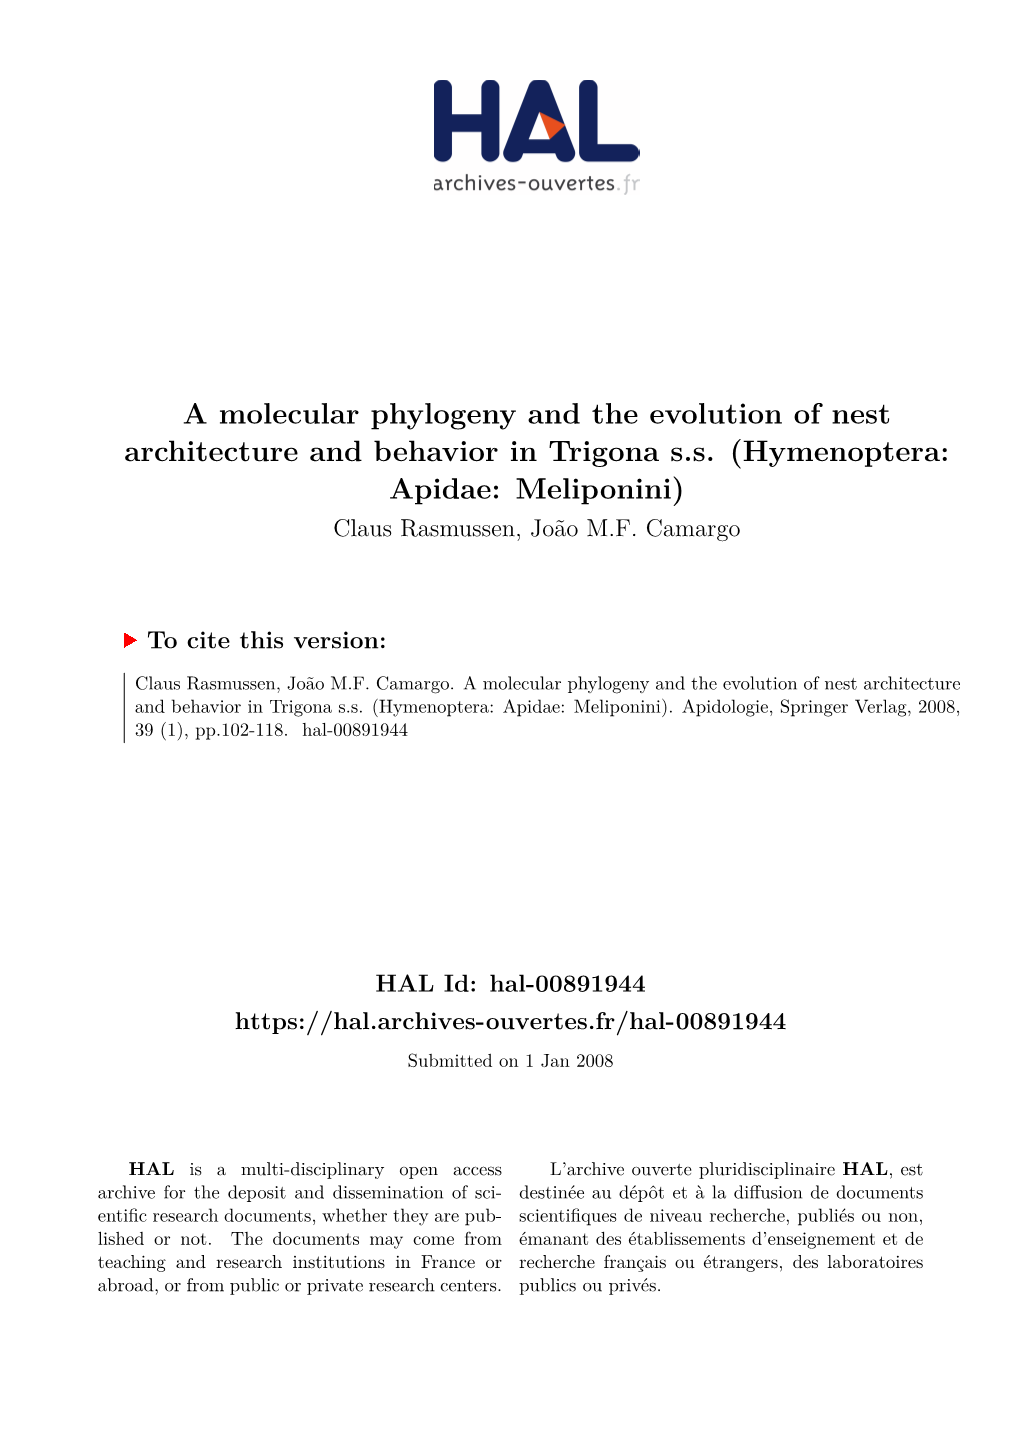 A Molecular Phylogeny and the Evolution of Nest Architecture and Behavior in Trigona S.S. (Hymenoptera: Apidae: Meliponini) Claus Rasmussen, João M.F